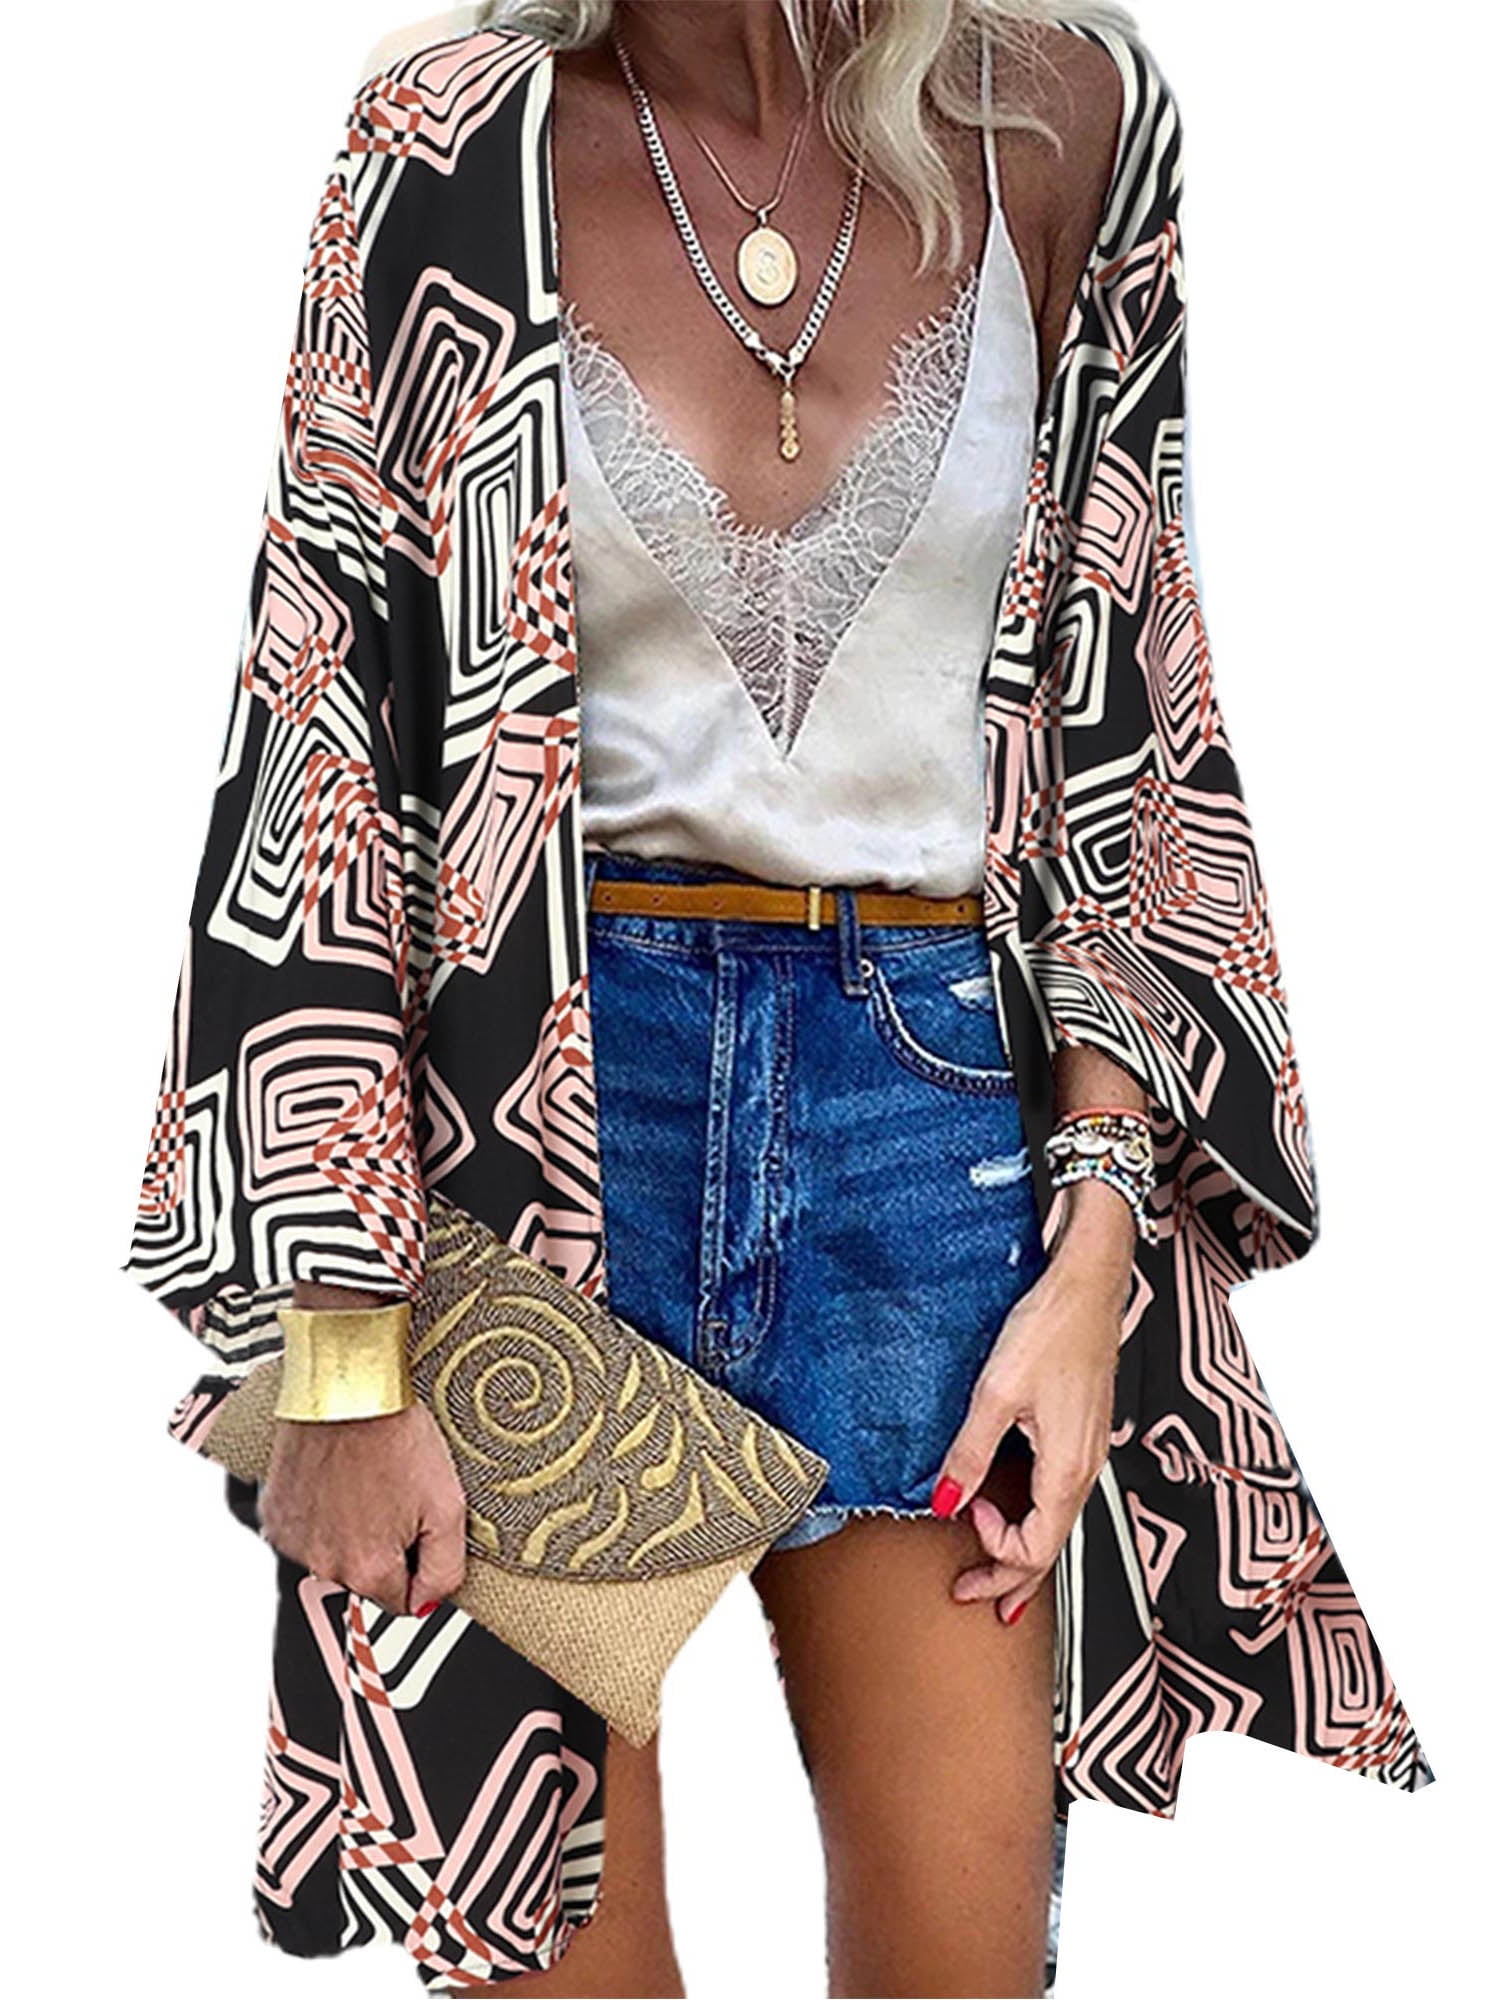 LilyLLL Plus Size Womens Boho Floral Cover Up Blouse Kimono Open Front ...